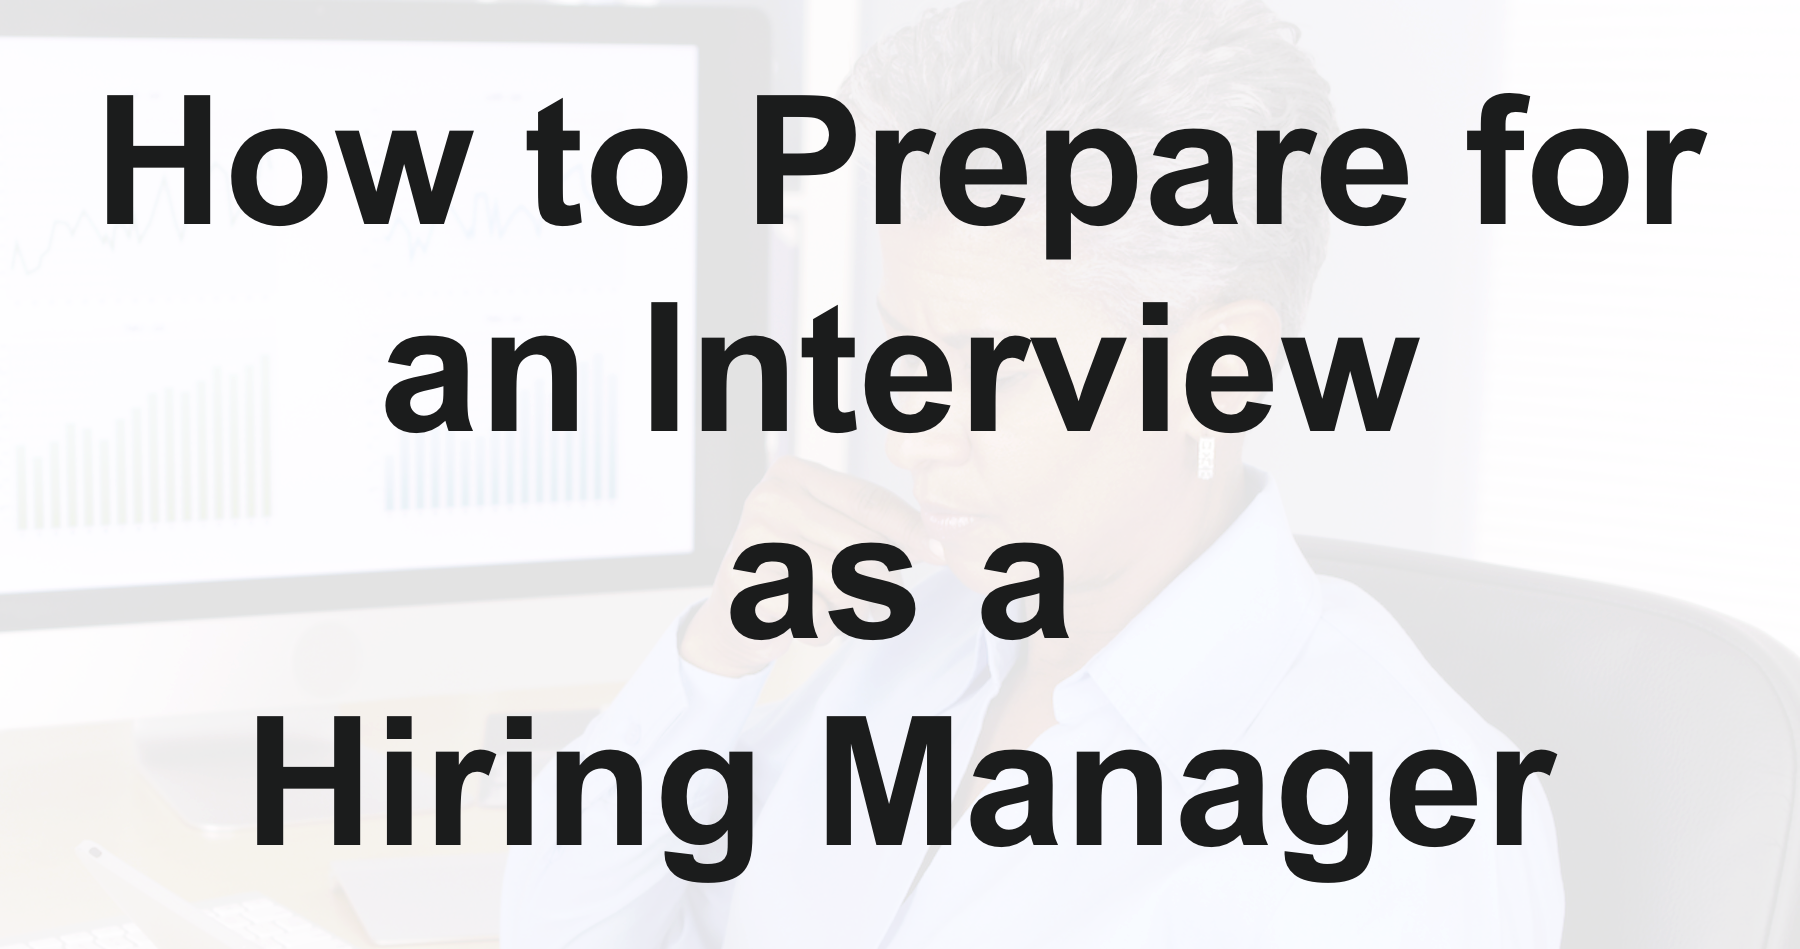 How to Prepare for an Interview as a Hiring Manager